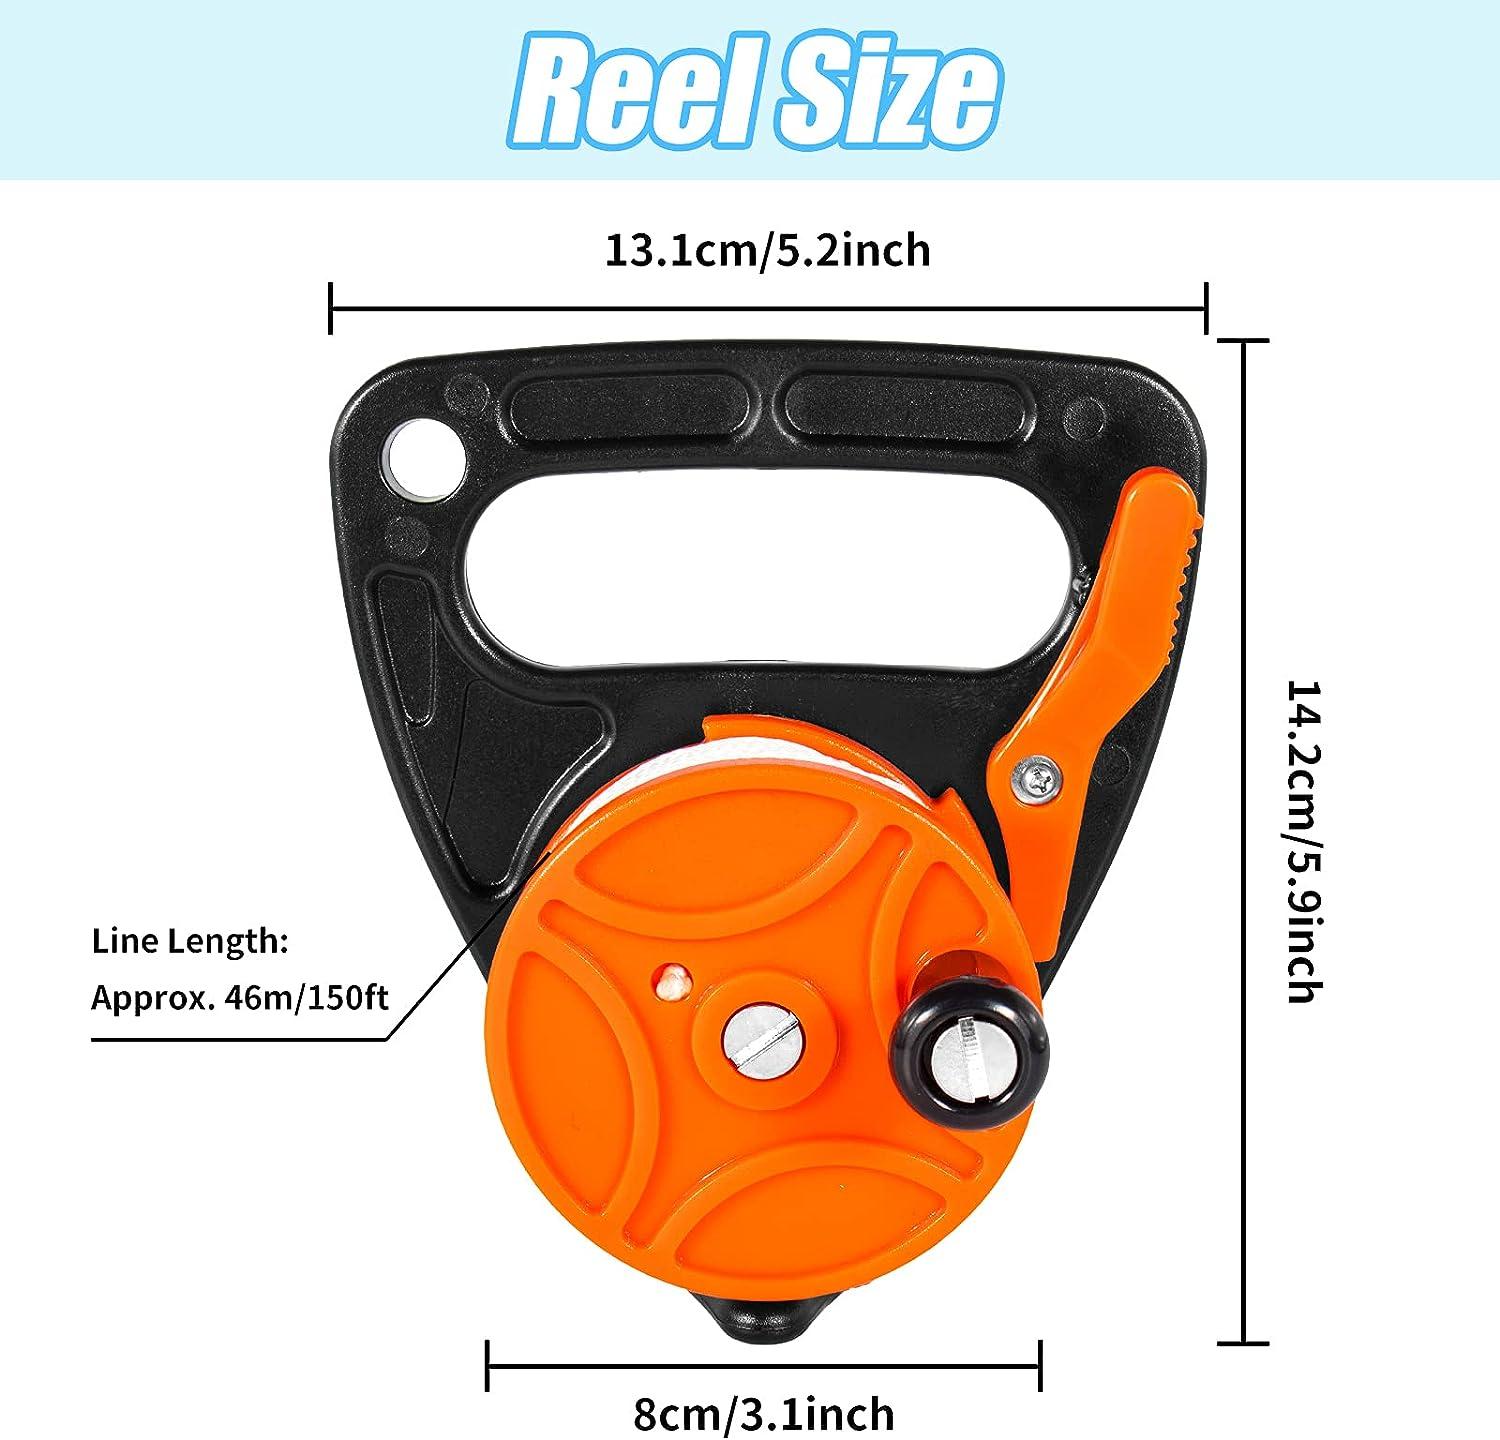 Compact Scuba Dive Reel Kayak Anchor For Safety Underwater Diving